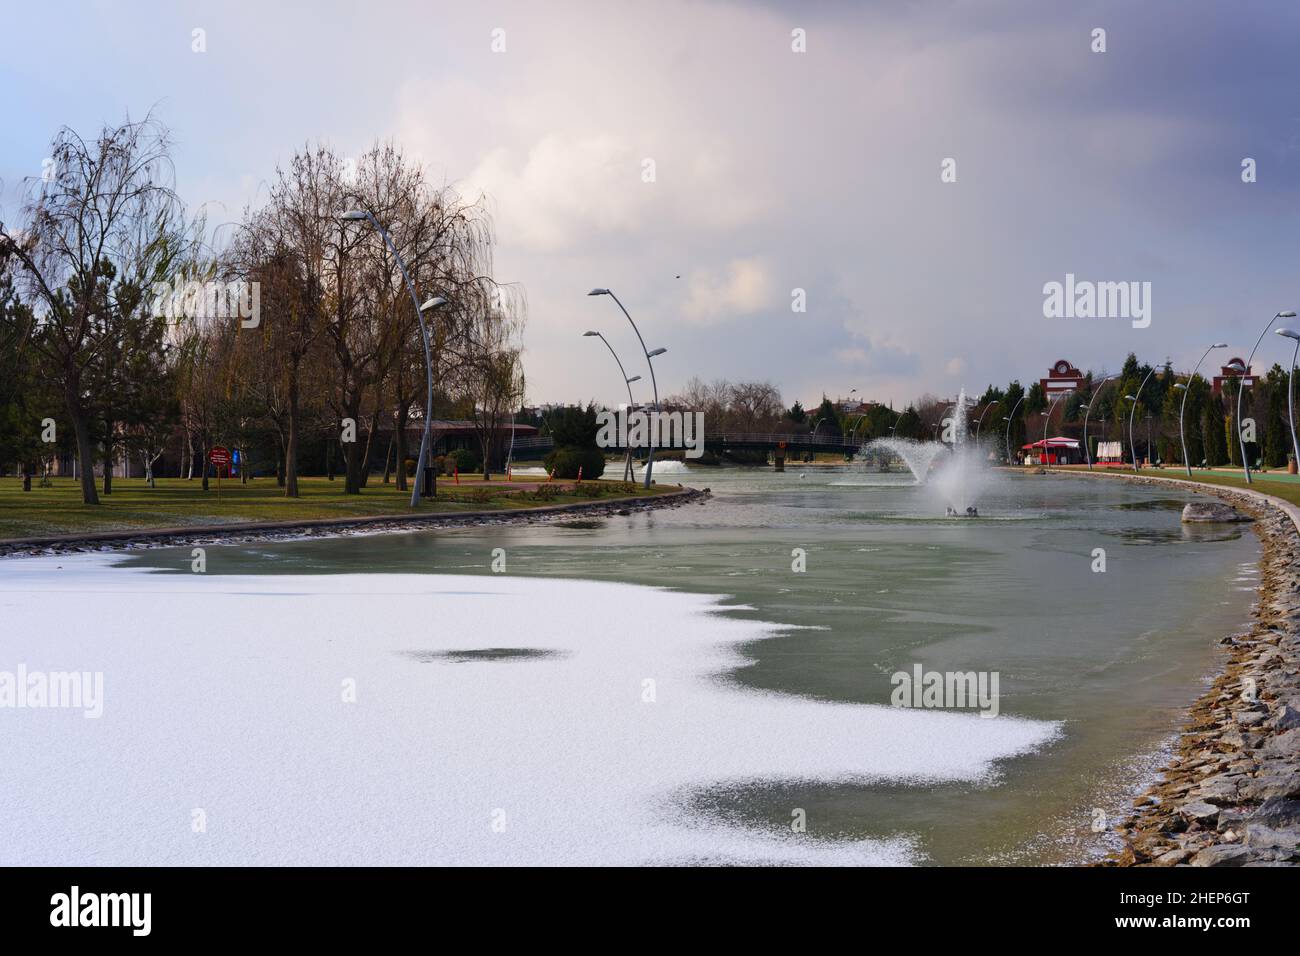 Partly frozen artificial lake and fountain at Eskisehir Kentpark Stock Photo